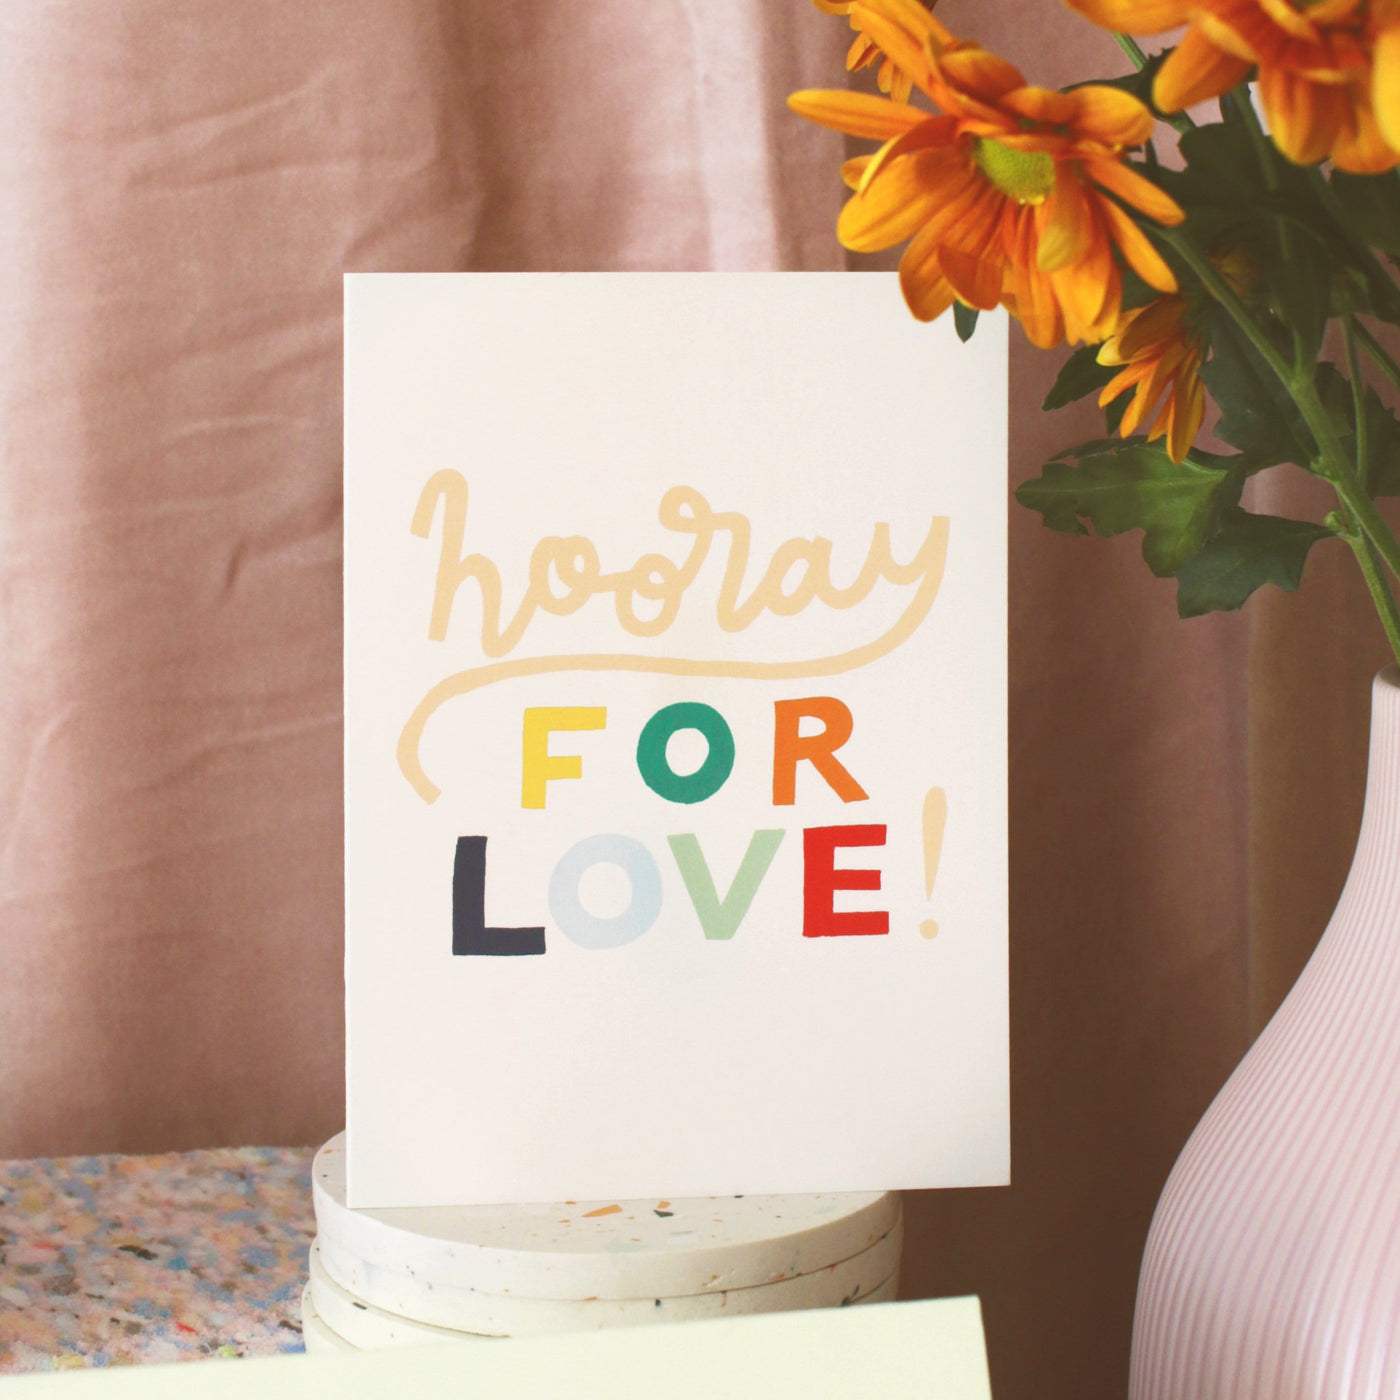 A Hand Lettered Rainbow Typography Card Which Reads Hooray For Love Next to Vase Of Orange Flowers - Annie Dornan Smith